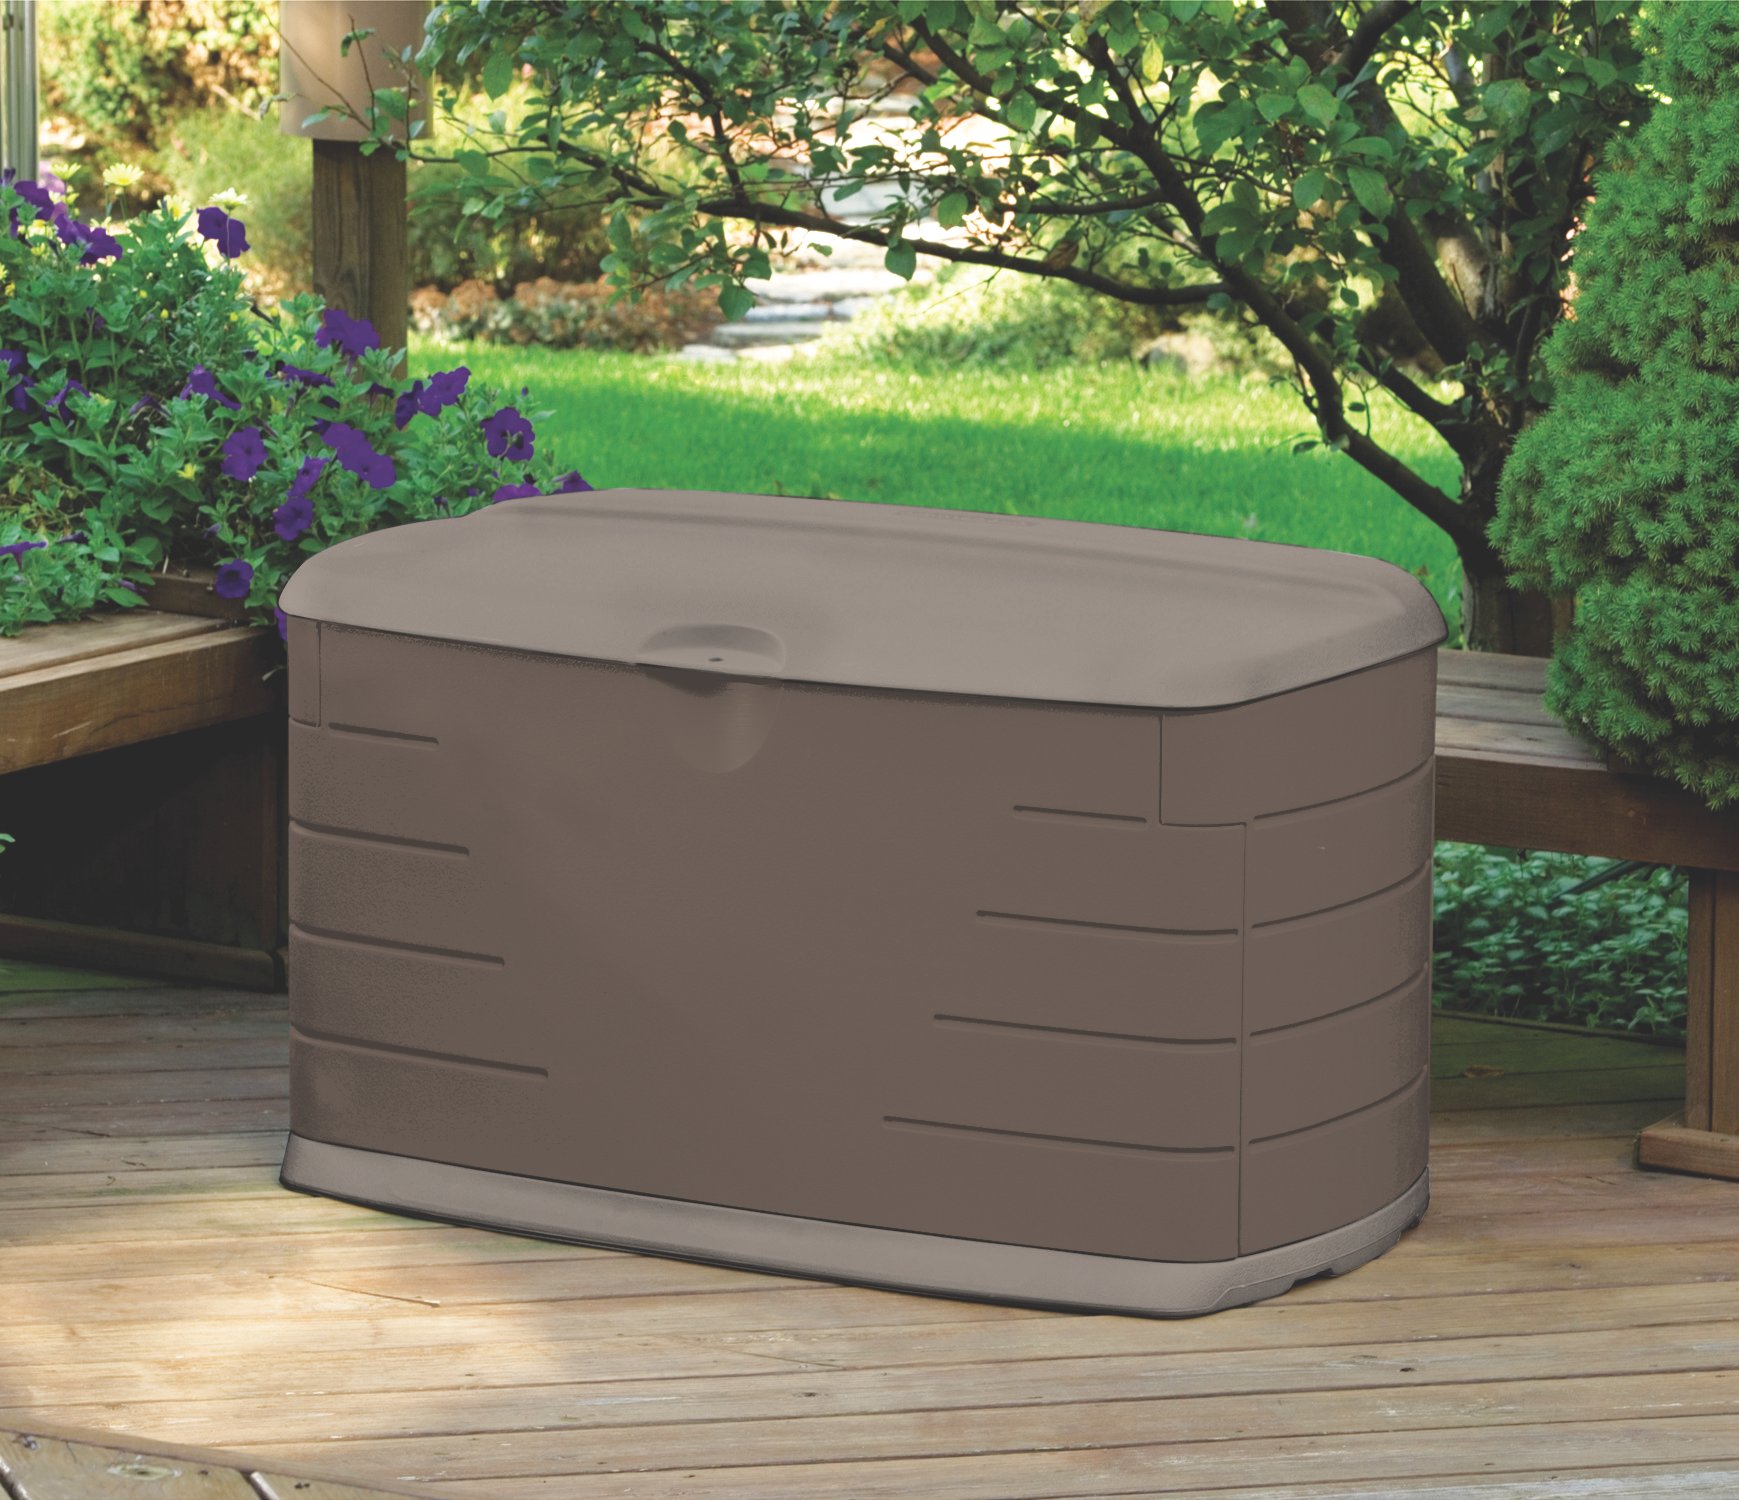 https://s7d9.scene7.com/is/image/NewellRubbermaid/2047053-outdoor-medium-deck-box-with-seat-putty-canteen-brown-1-1